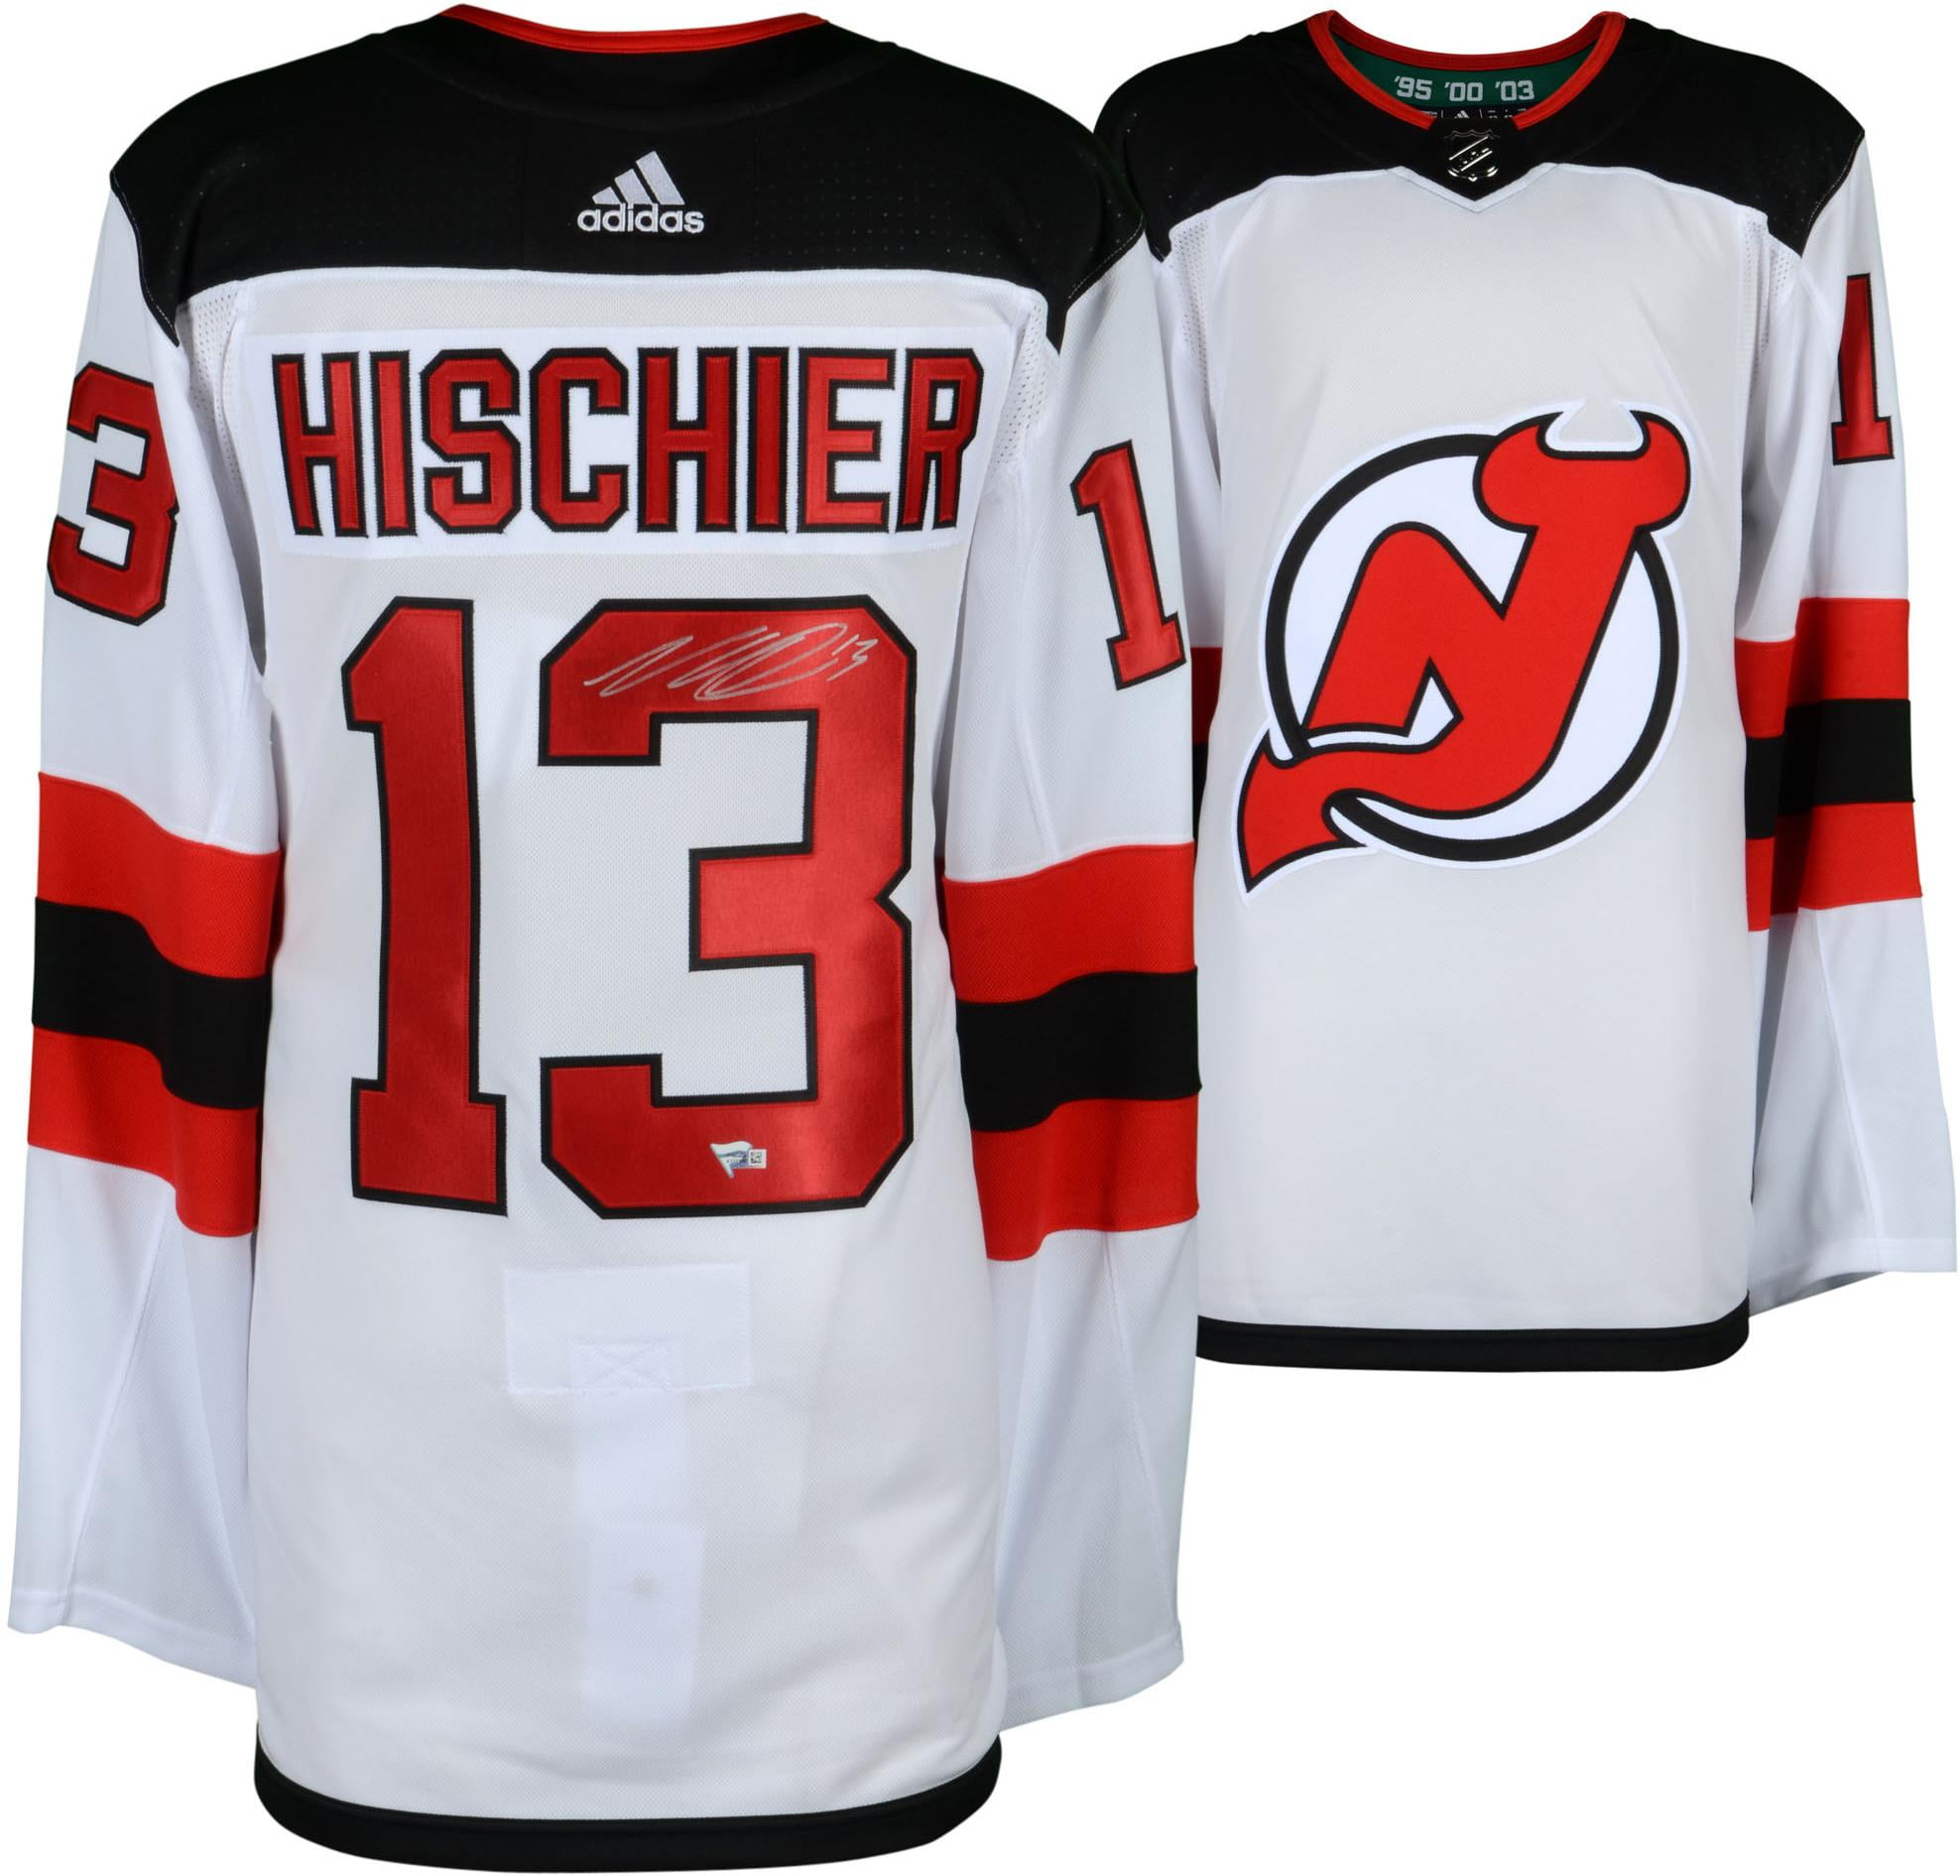 Nico Hischier New Jersey Devils Autographed White Adidas Authentic